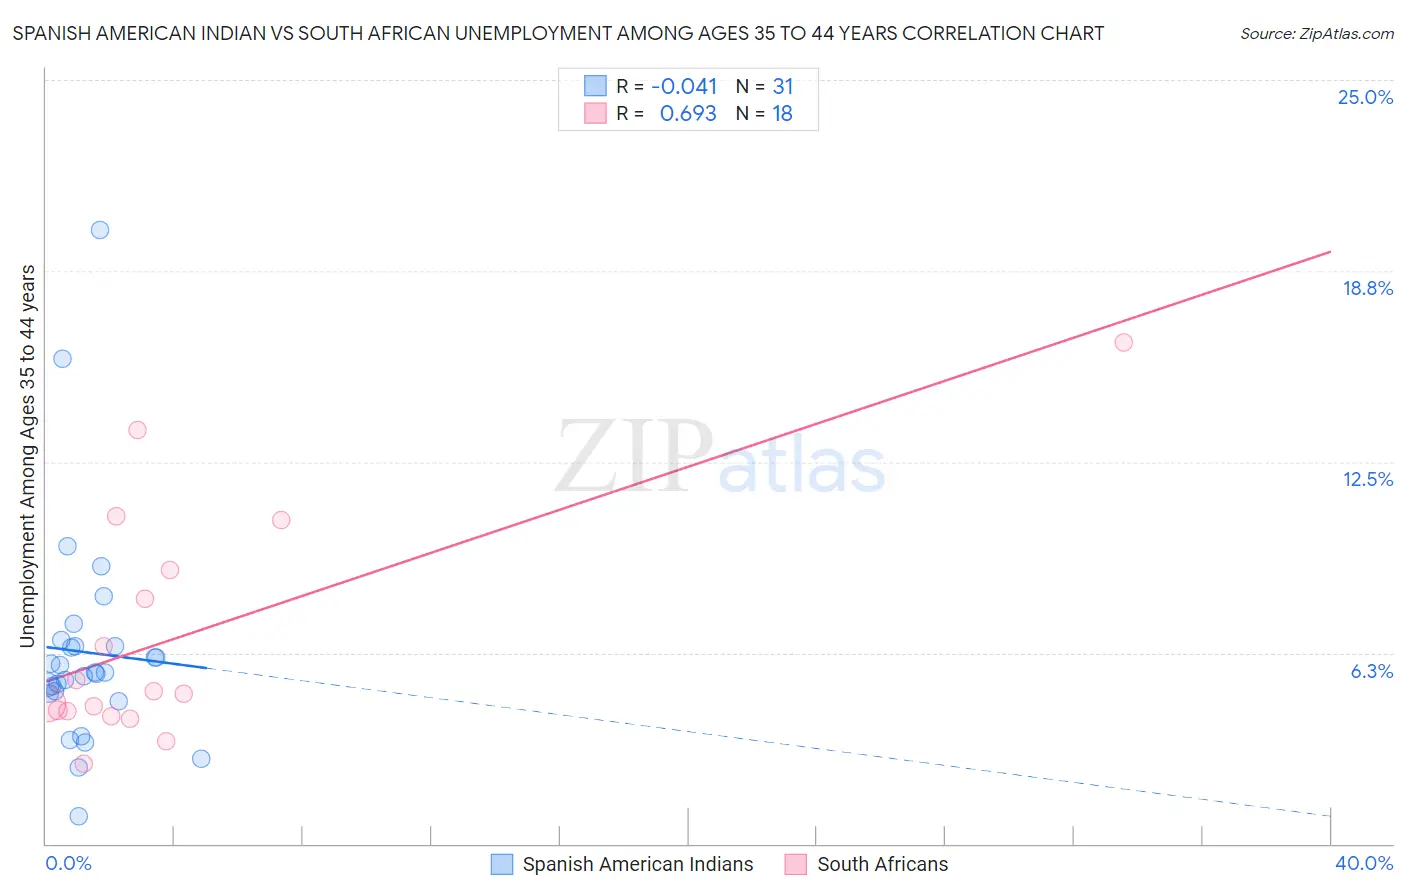 Spanish American Indian vs South African Unemployment Among Ages 35 to 44 years